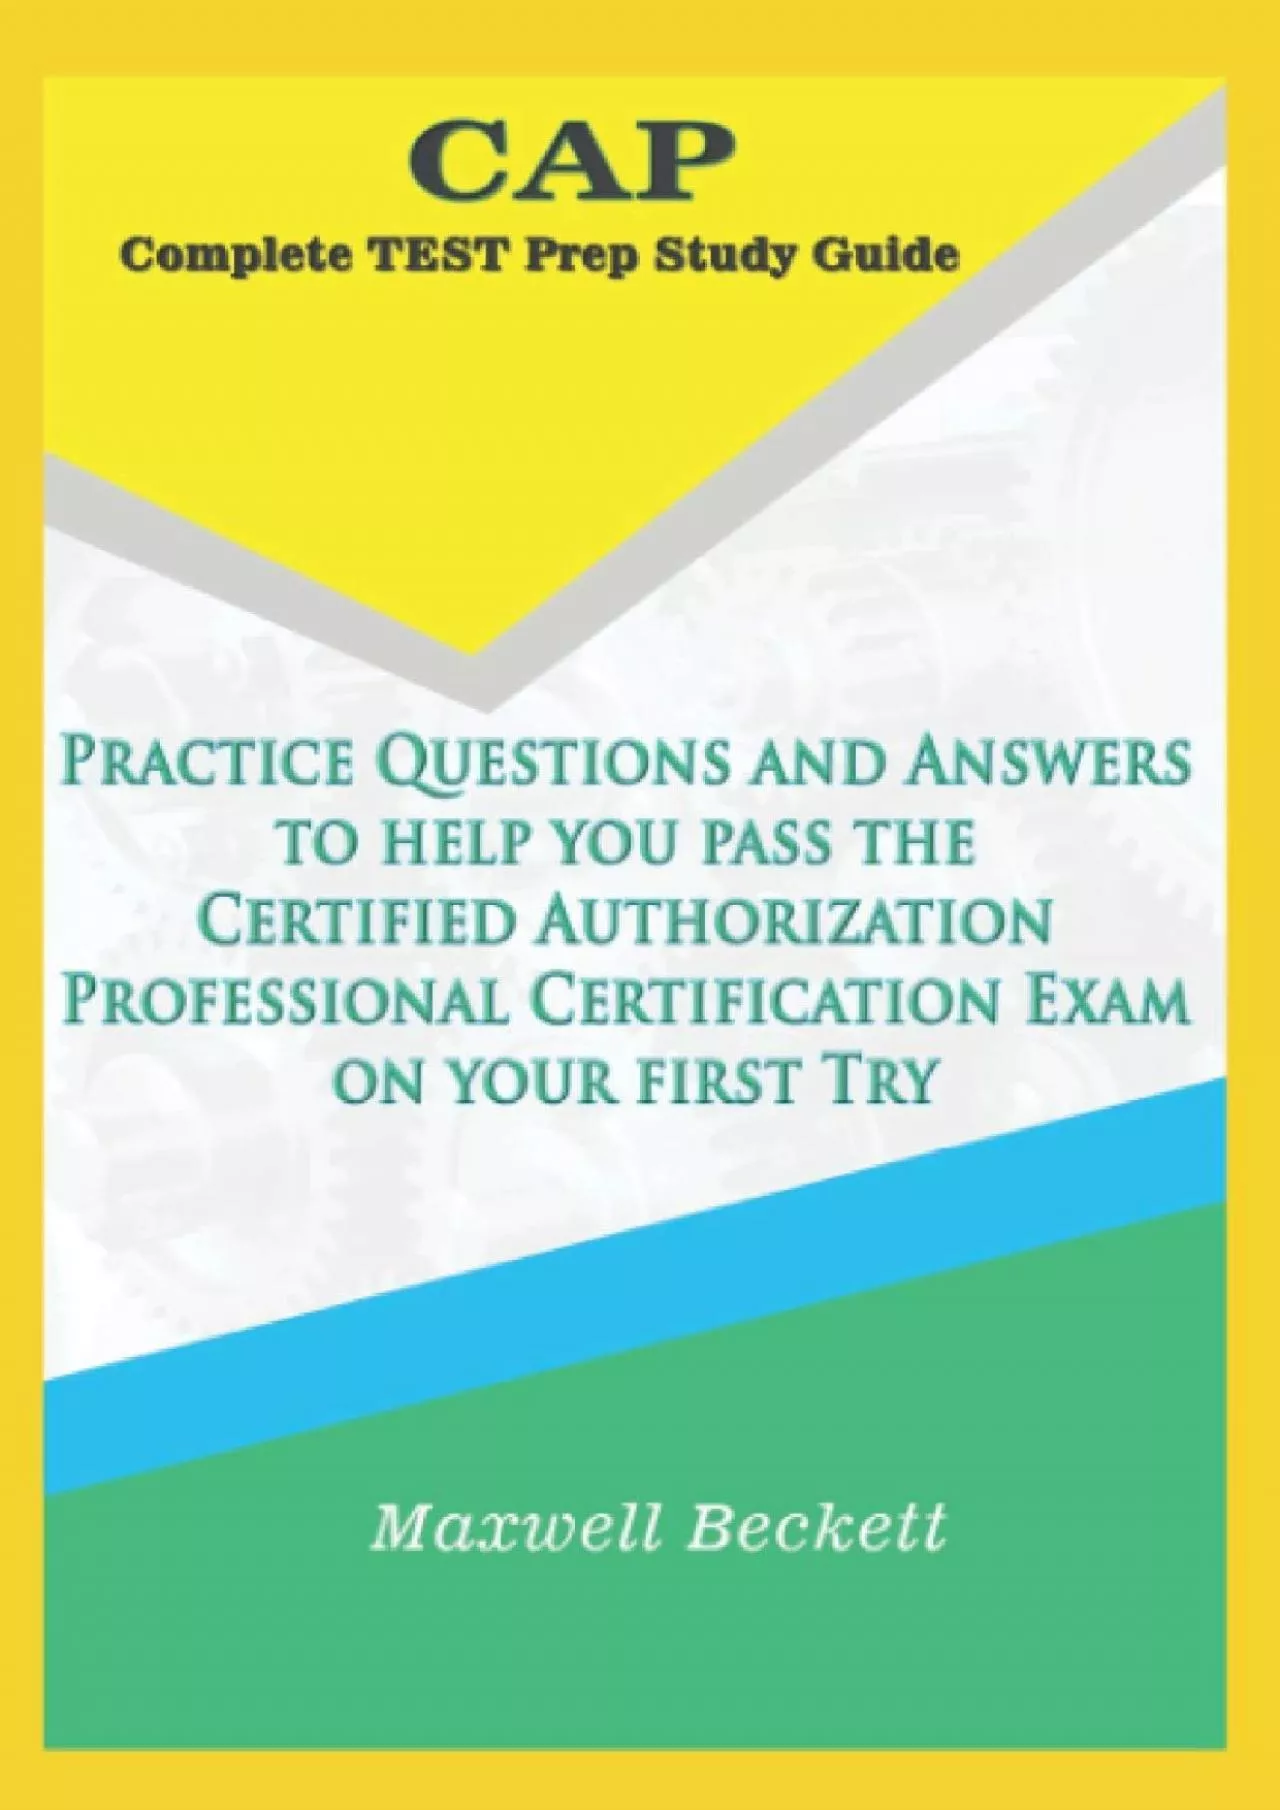 [DOWLOAD]-CAP Complete Test Prep Study Guide: Practice Questions and Answers to help you